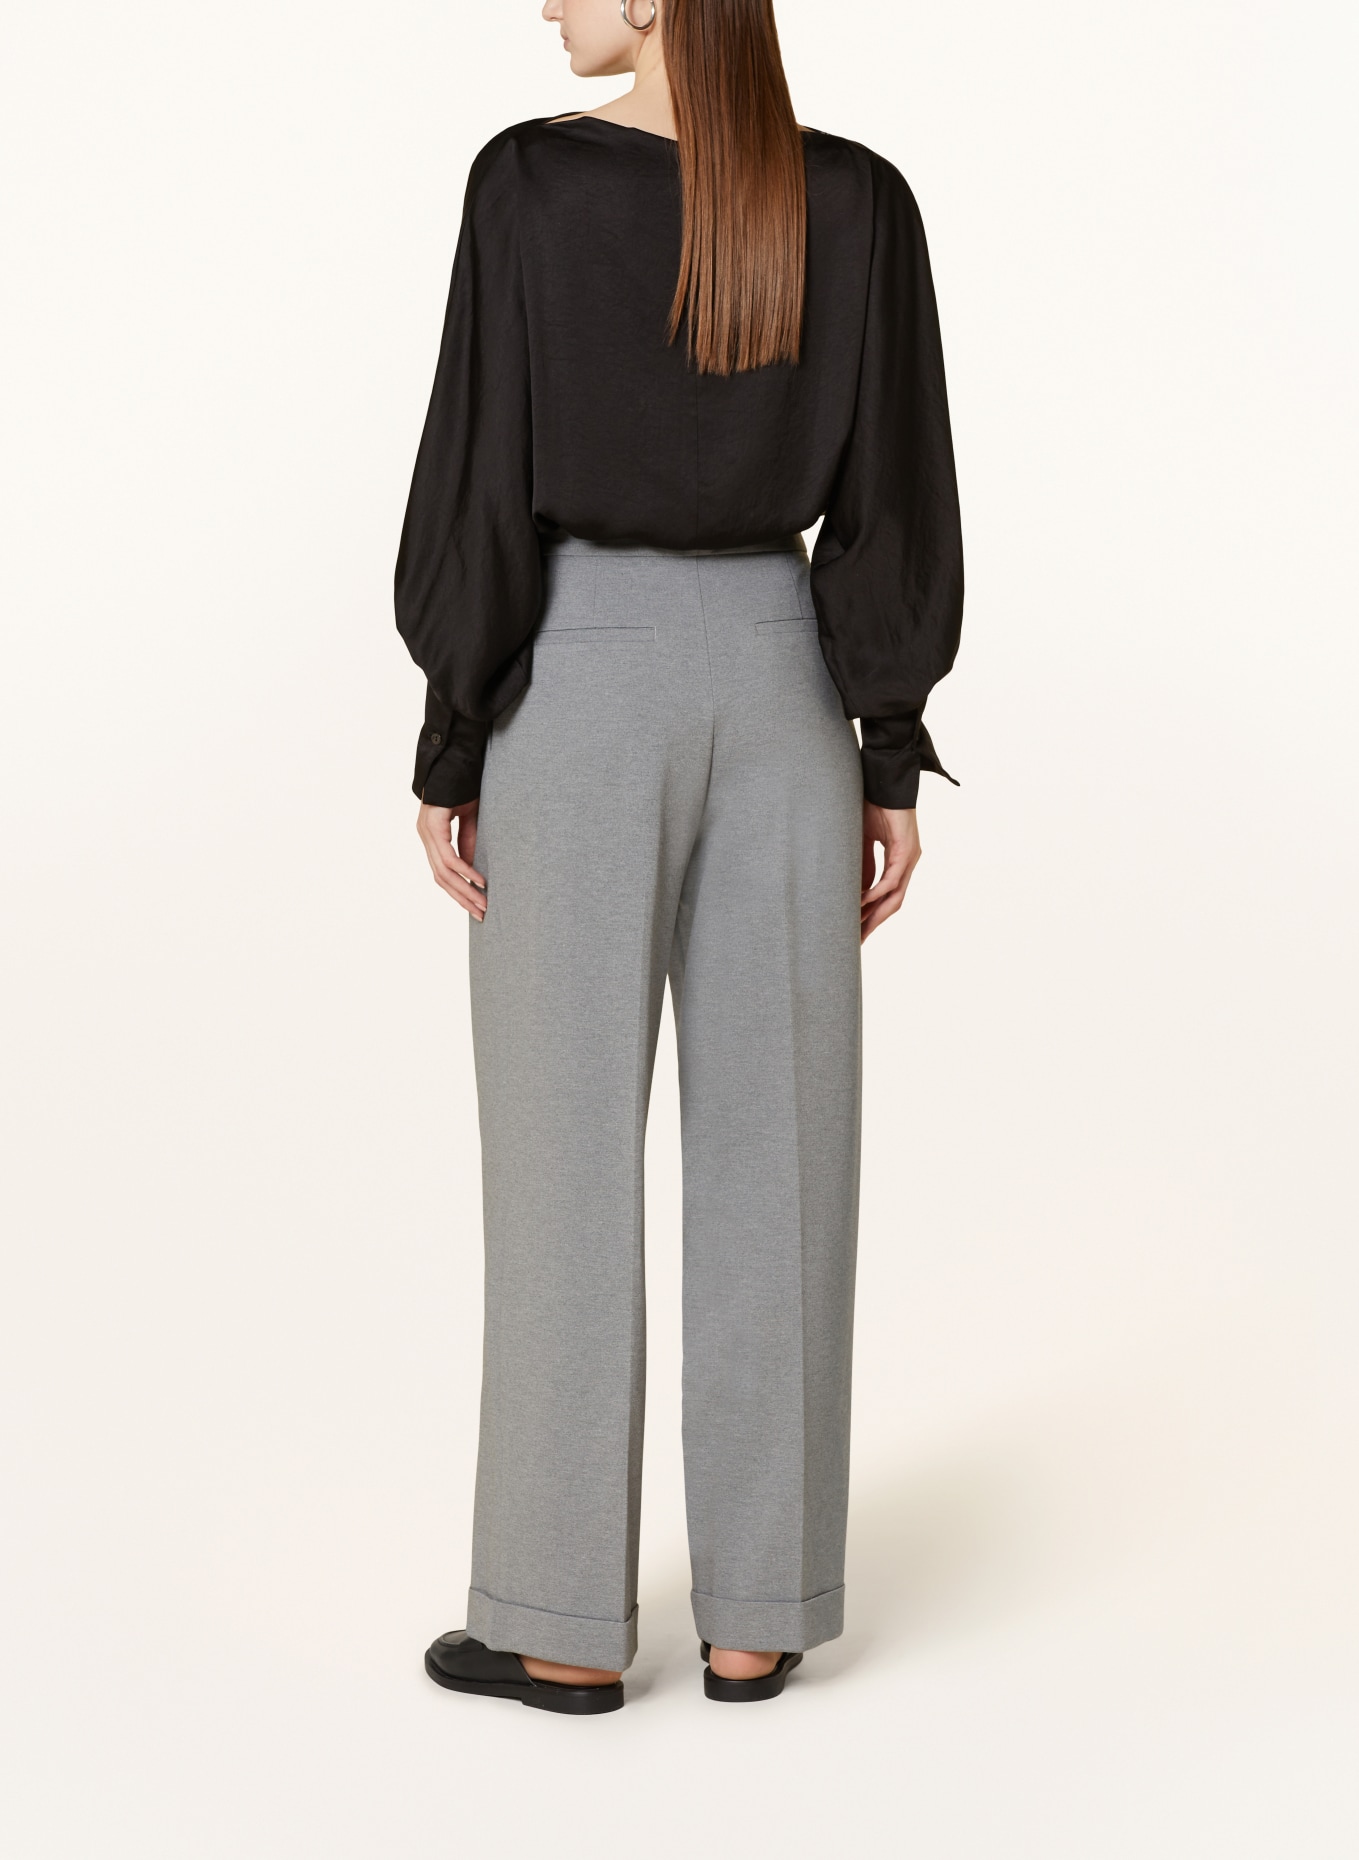 VANILIA Wide leg trousers made of jersey, Color: LIGHT GRAY (Image 3)